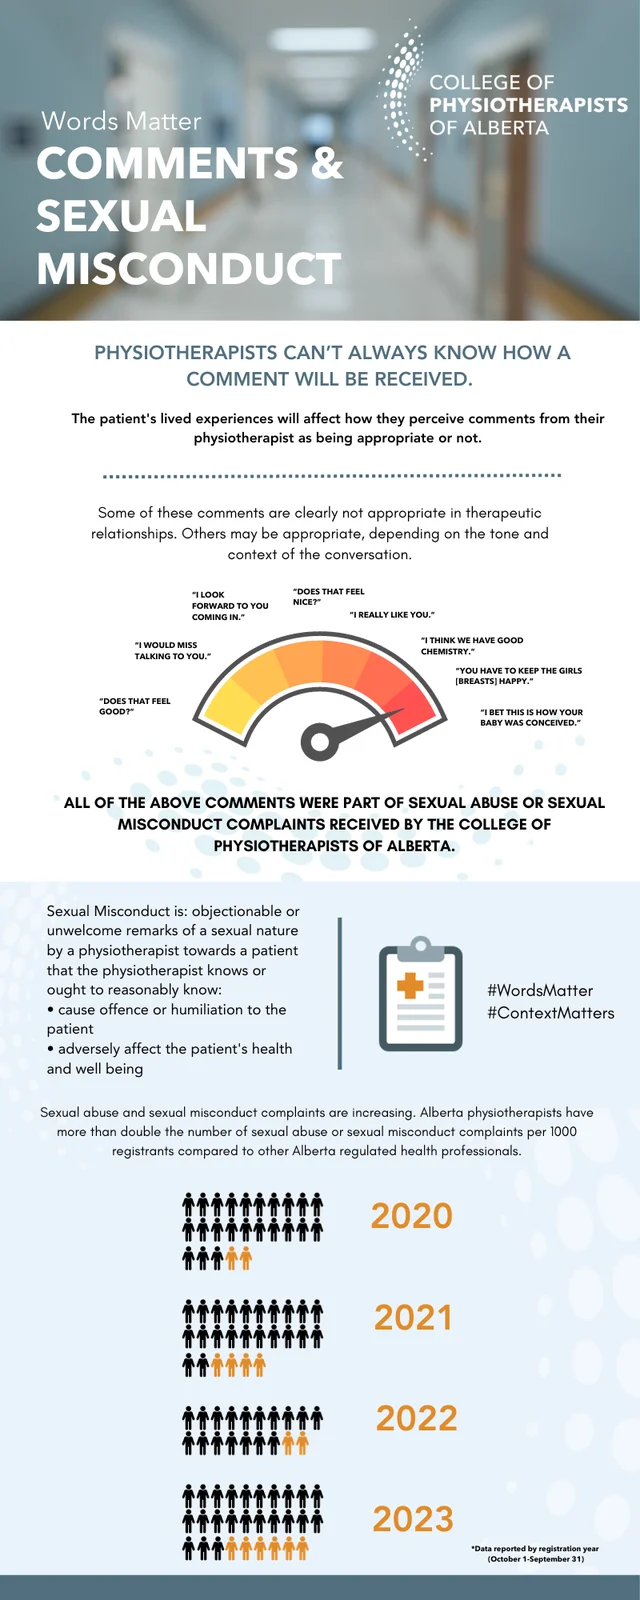 Comments & Sexual Misconduct Graphic_2023